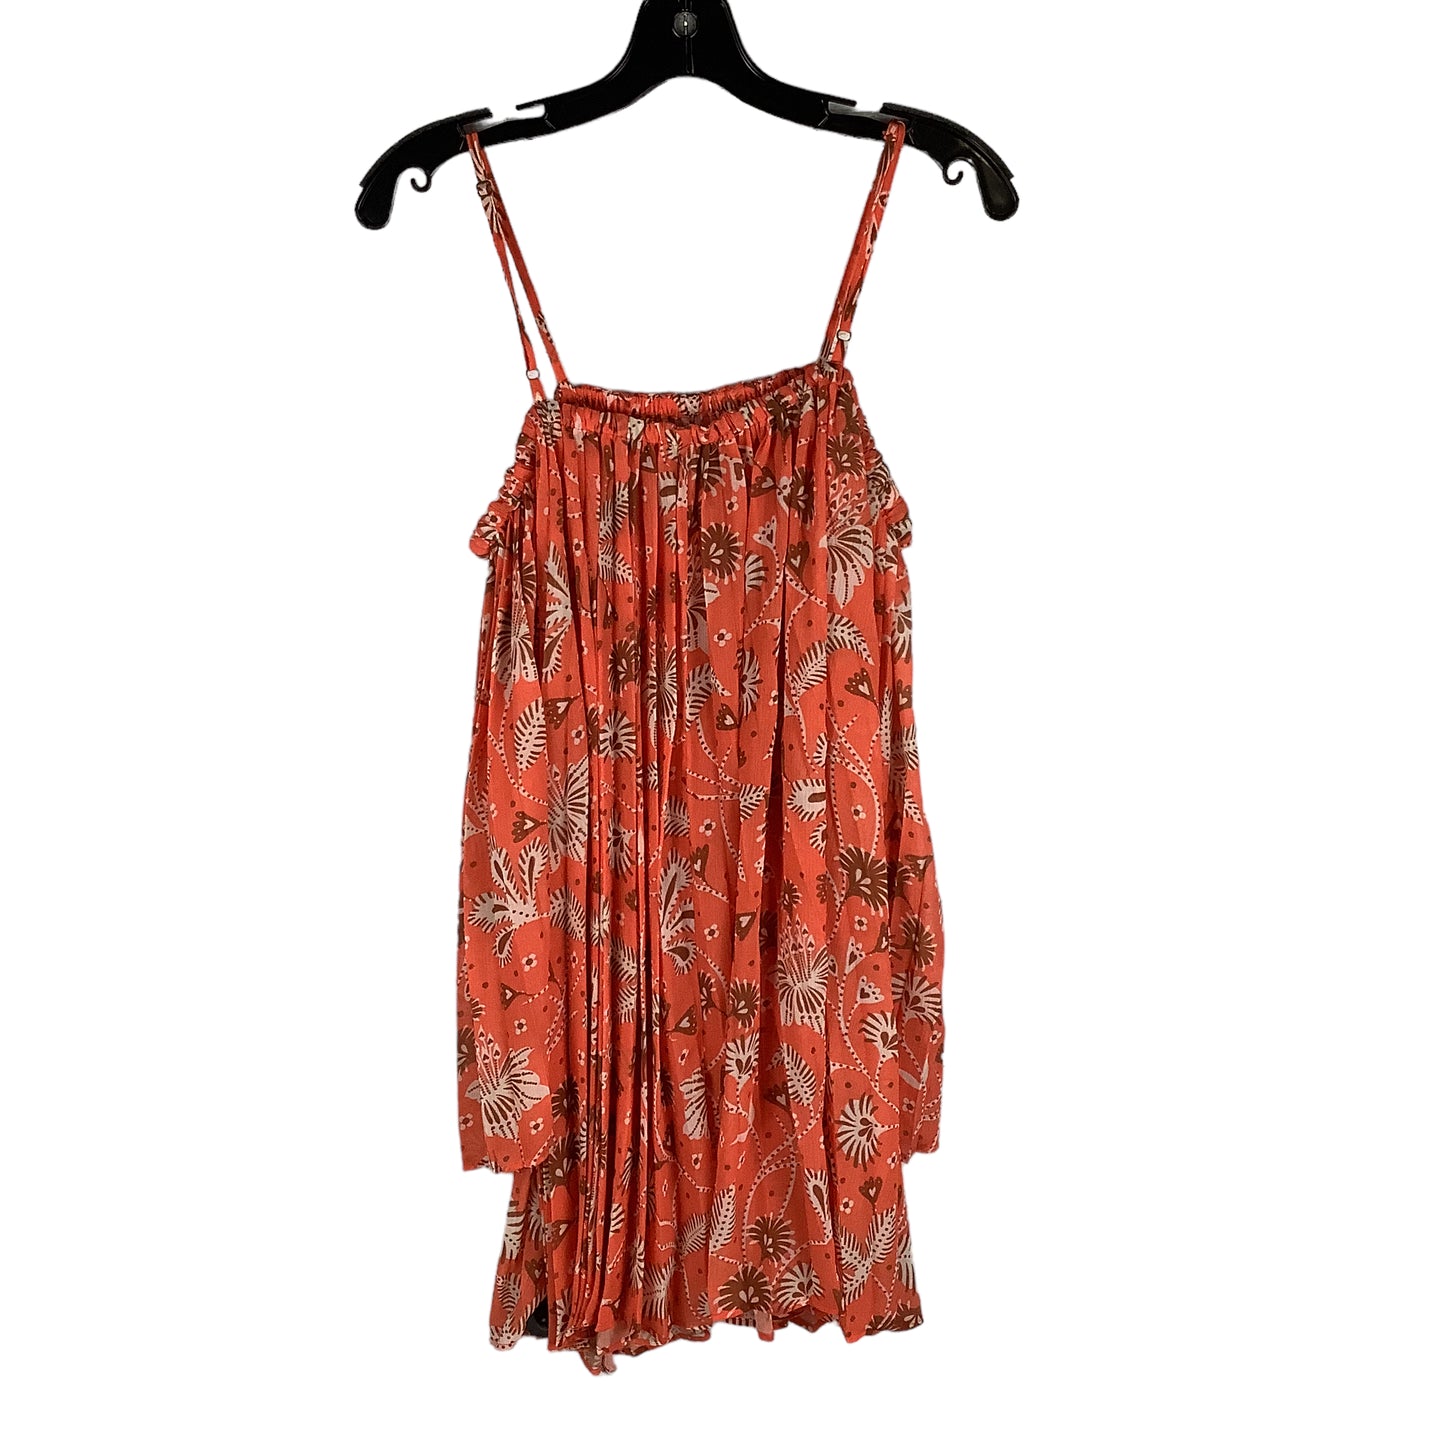 Dress/Tunic Top Casual Short By Anthropologie  Size: M